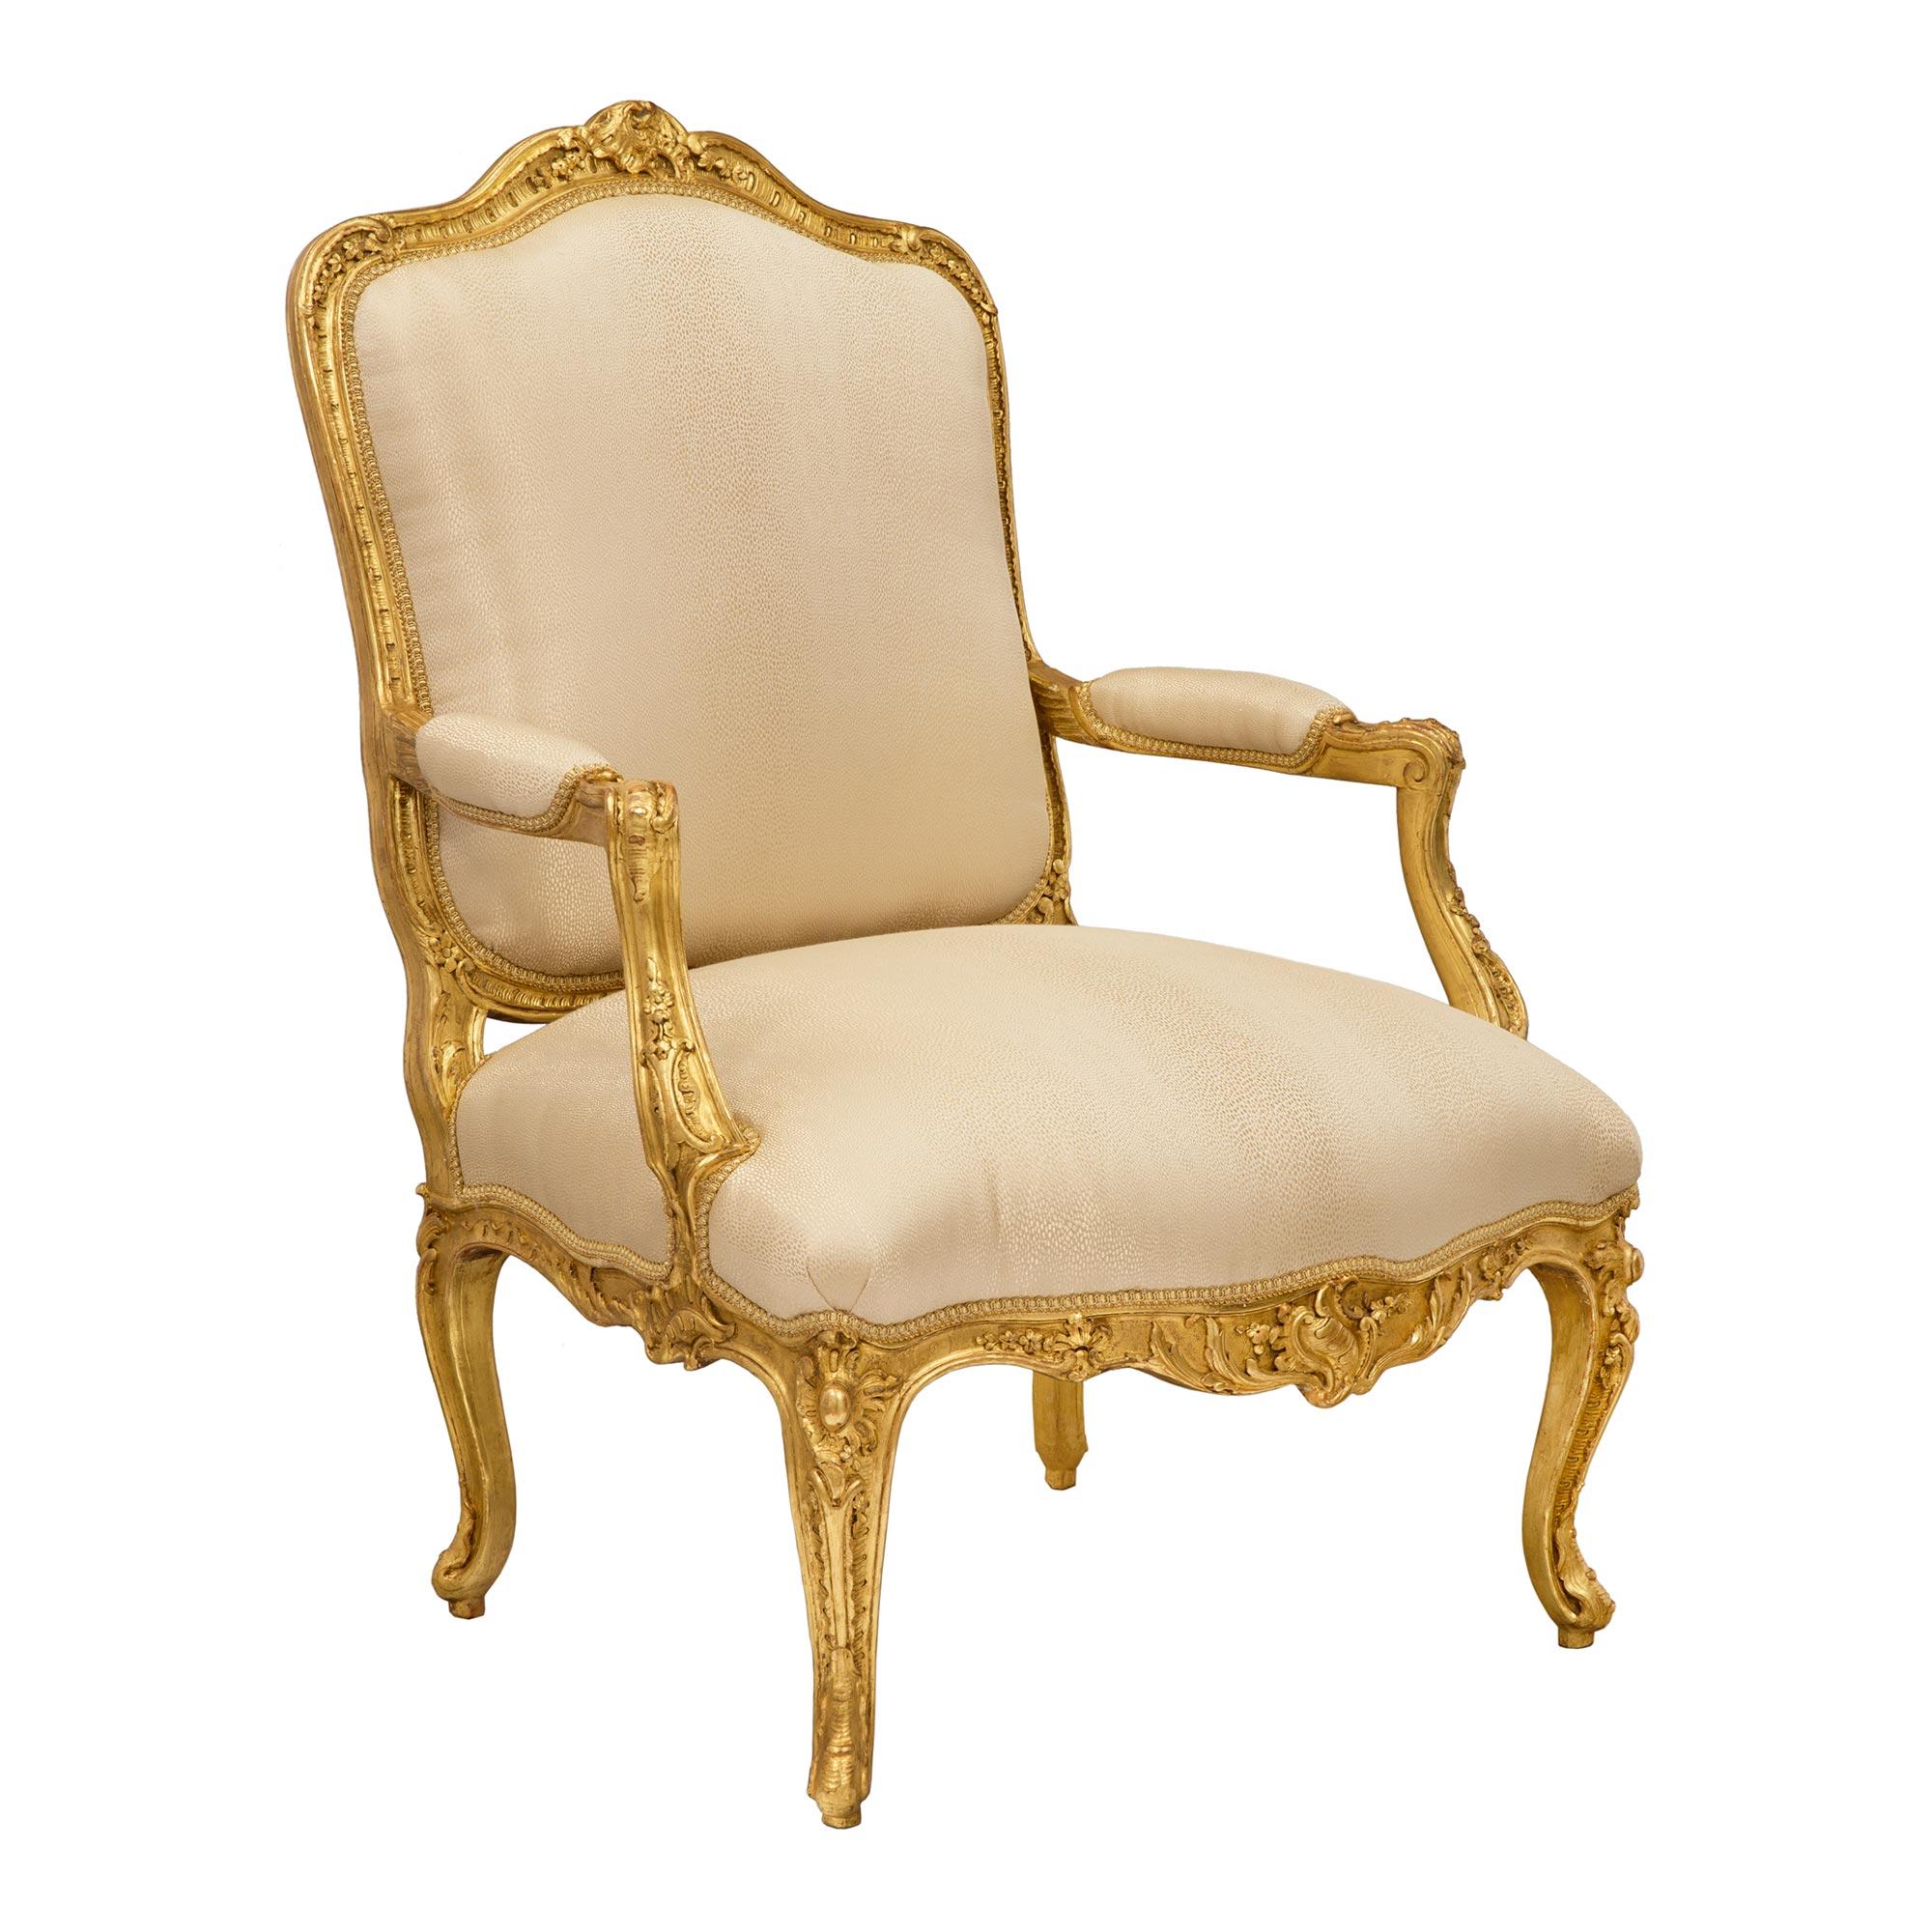 A superb pair of French 19th century Louis XV st. giltwood armchairs. Each chair is raised by elegant cabriole legs decorated with richly carved foliate details. The arbalest shaped frieze are centered by beautiful and finely carved reserves flanked